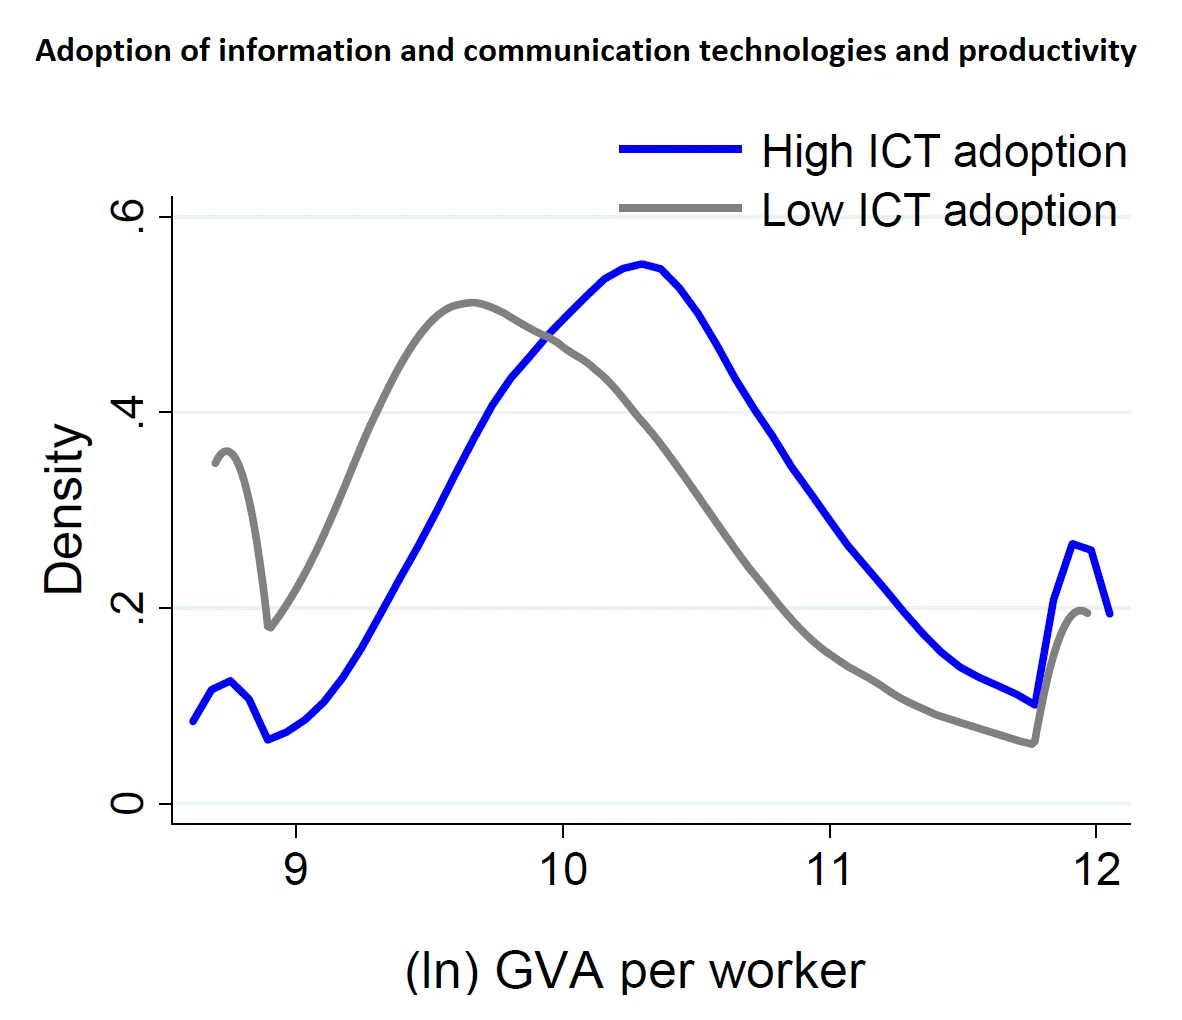 Economics in a picture: Firms with stronger adoption of information and communication technologies are more productive